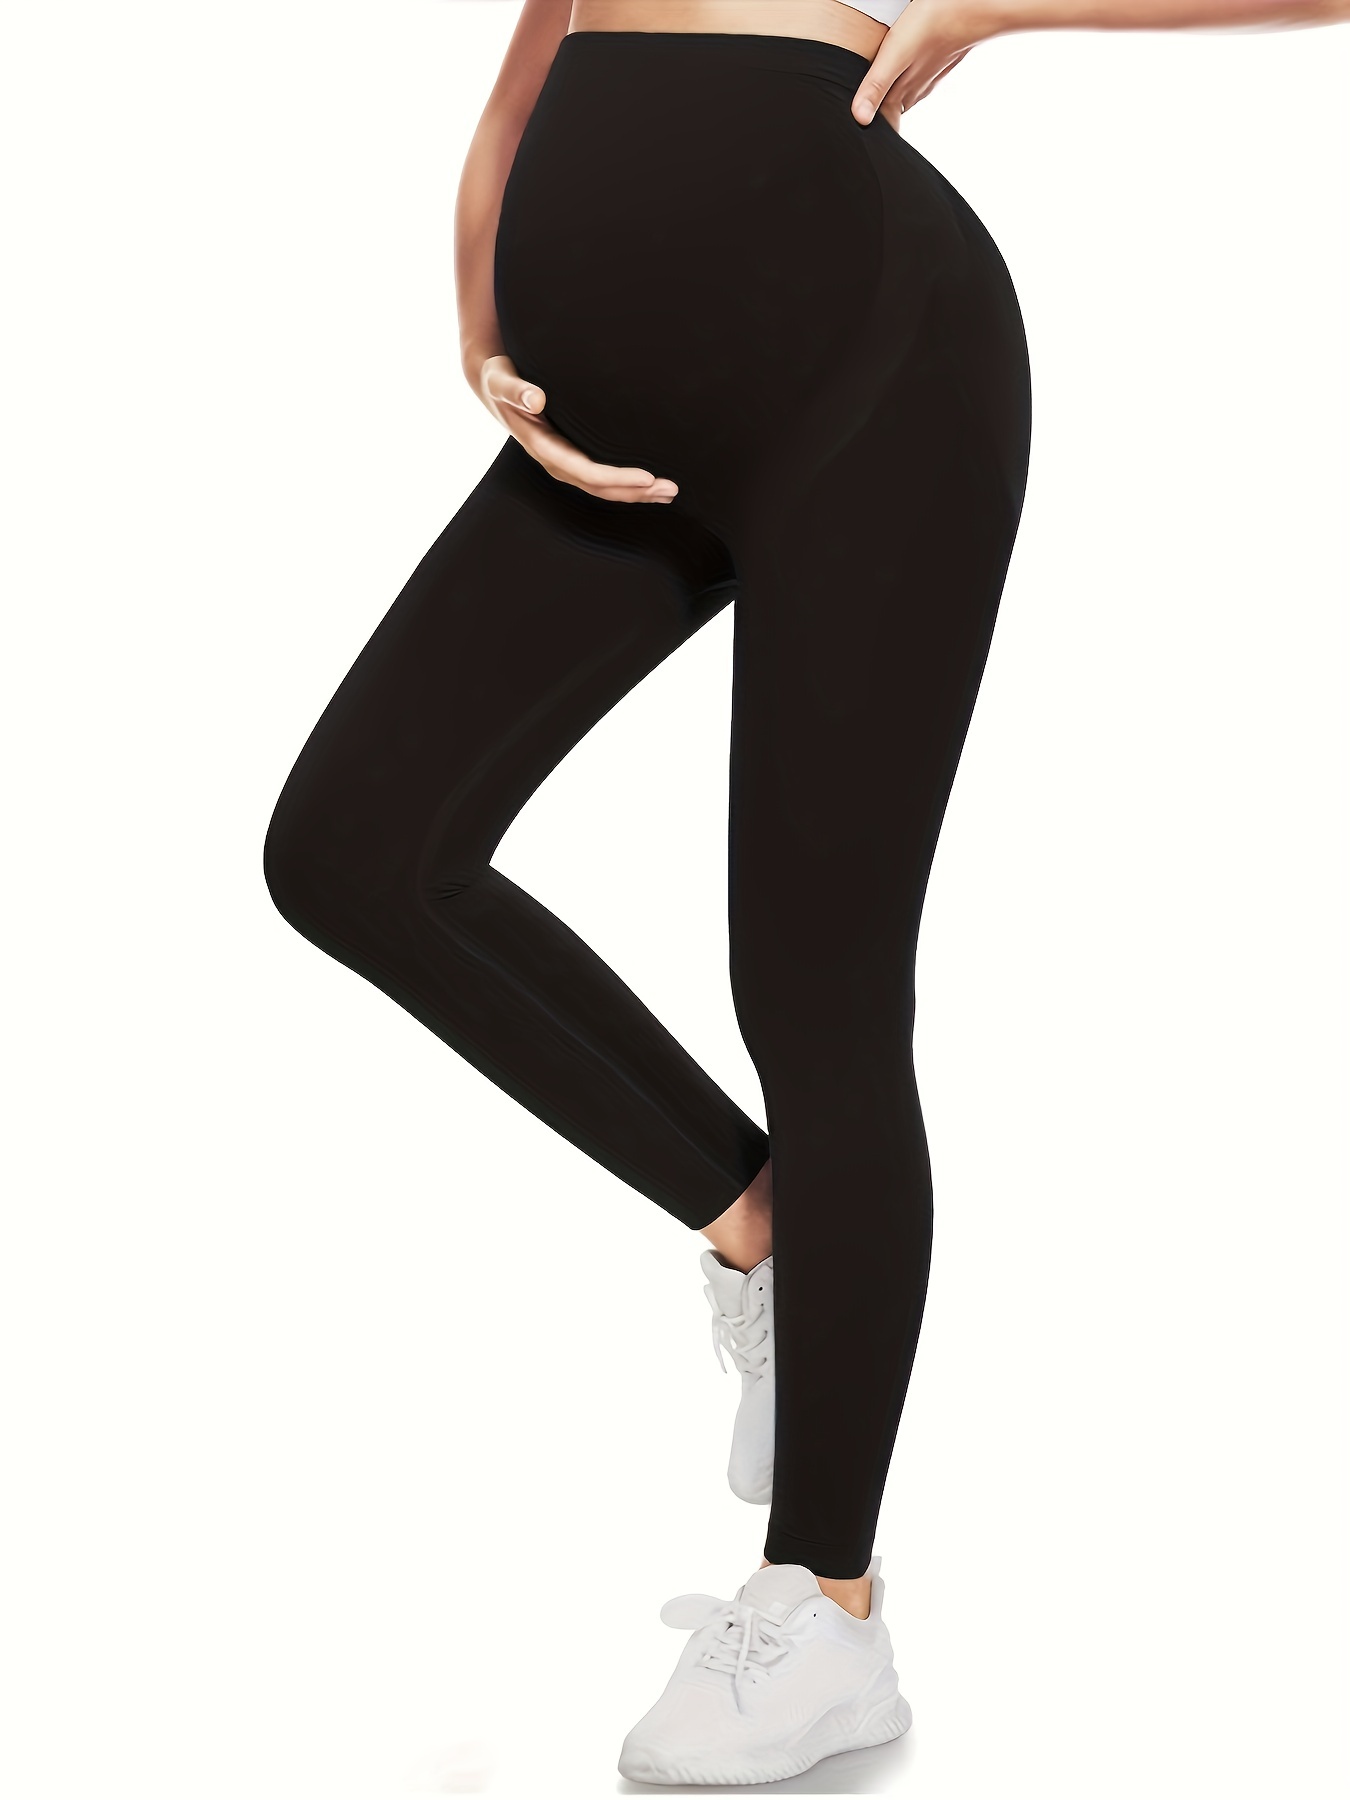 Alled Maternity Leggings Over The Belly, Buttery Soft Maternity Leggings  Flare, Women's Maternity Pants Pregnancy Yoga Pants (M) Black at   Women's Clothing store